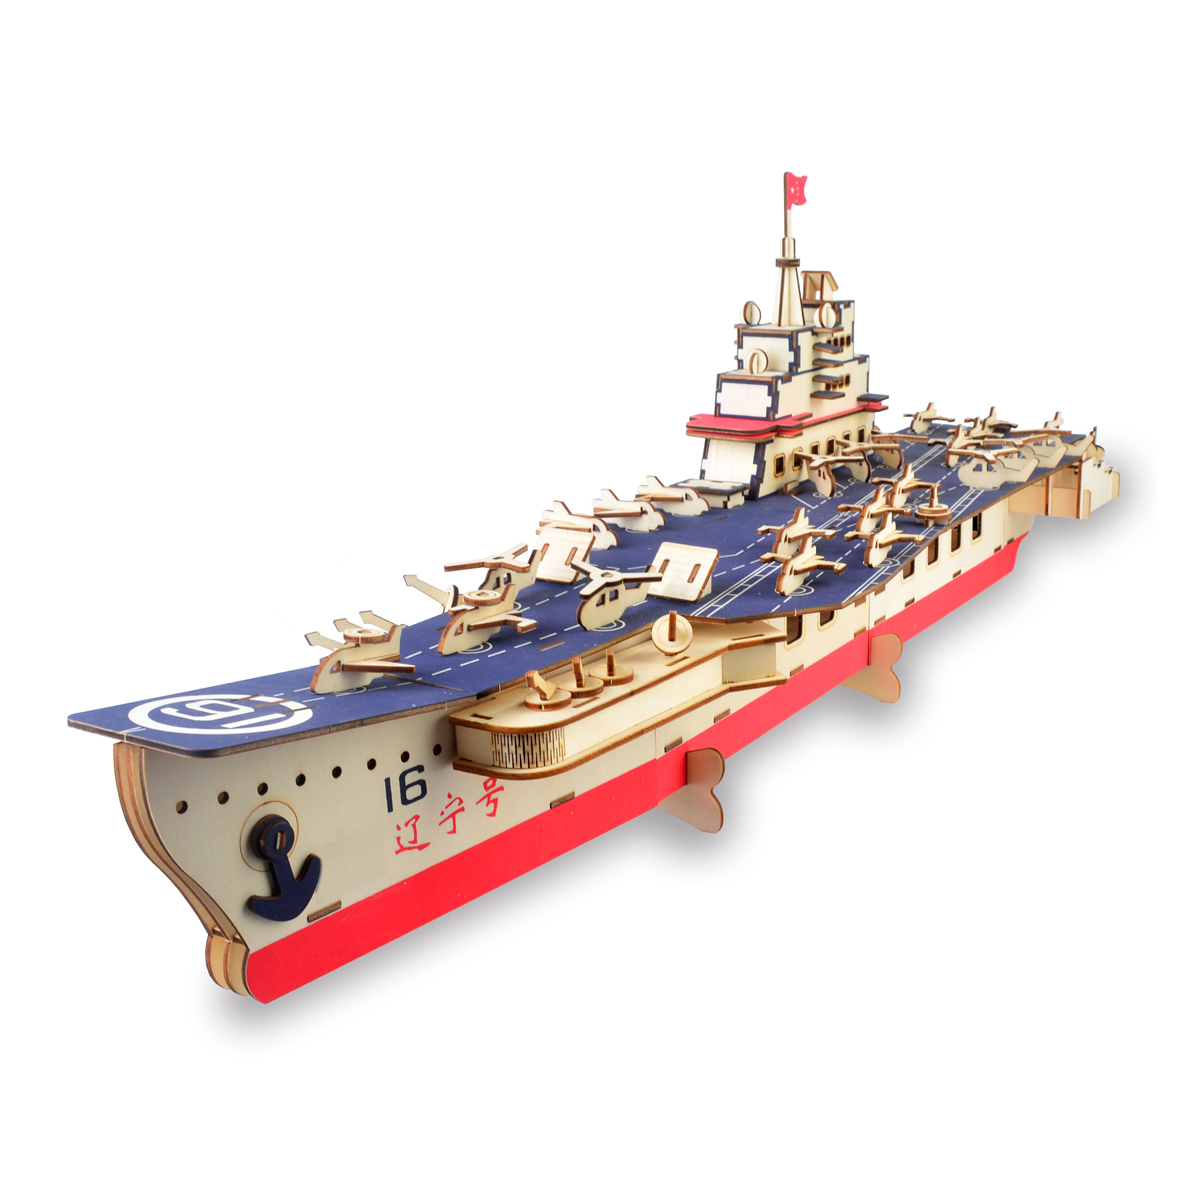 3D-Woodcraft-Assembly-Battleship-Series-Kit-Jigsaw-Puzzle-Toy-Decoration-Model-for-Kids-Gift-1632733-9